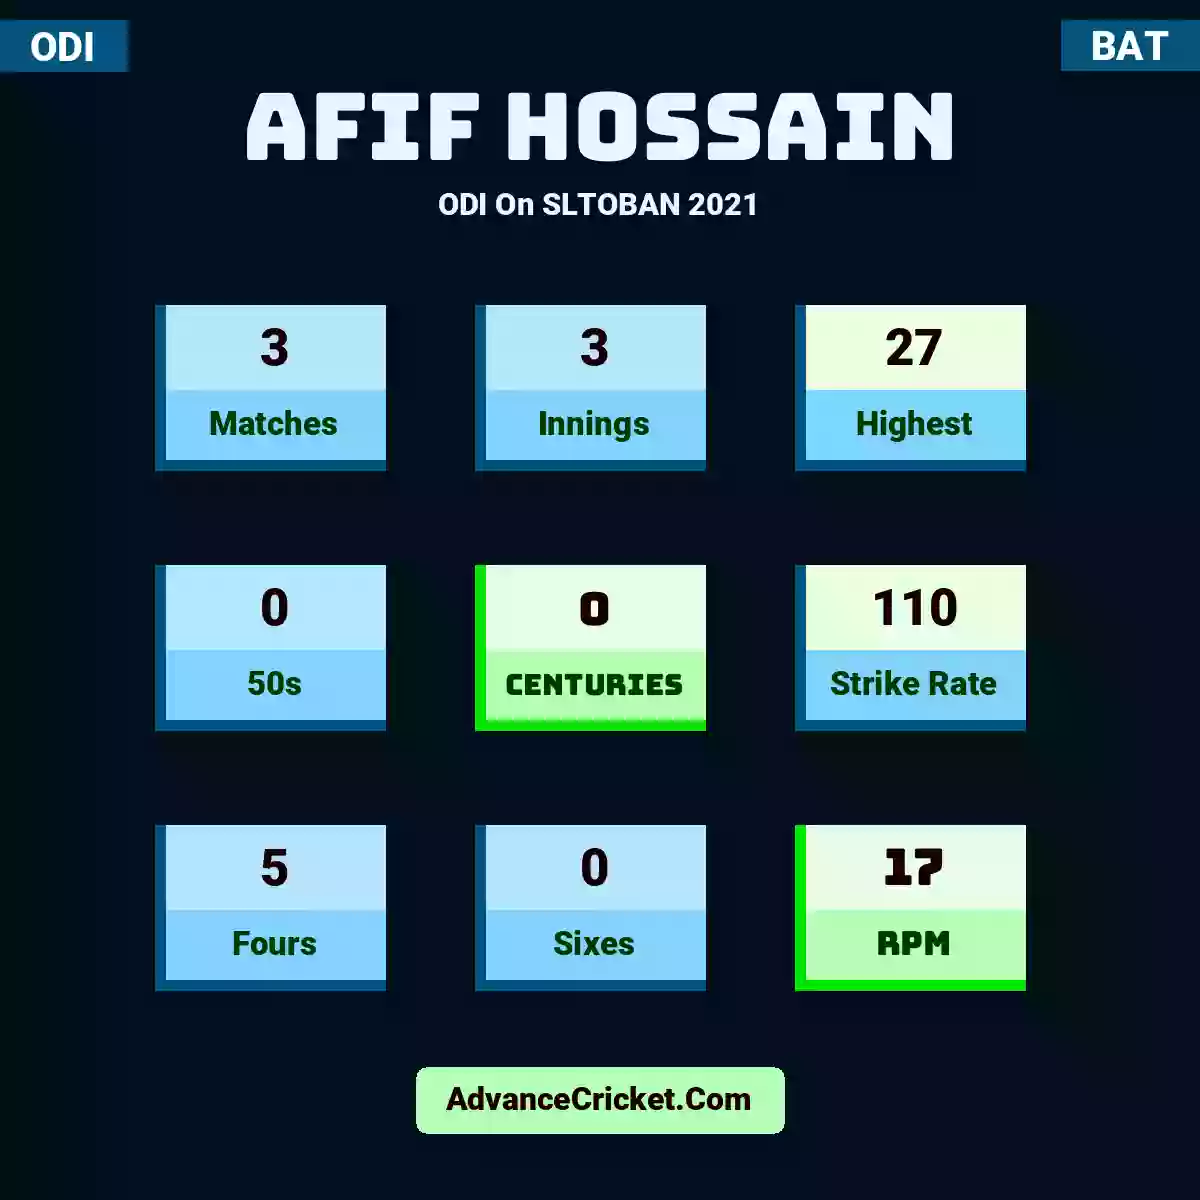 Afif Hossain ODI  On SLTOBAN 2021, Afif Hossain played 3 matches, scored 27 runs as highest, 0 half-centuries, and 0 centuries, with a strike rate of 110. A.Hossain hit 5 fours and 0 sixes, with an RPM of 17.